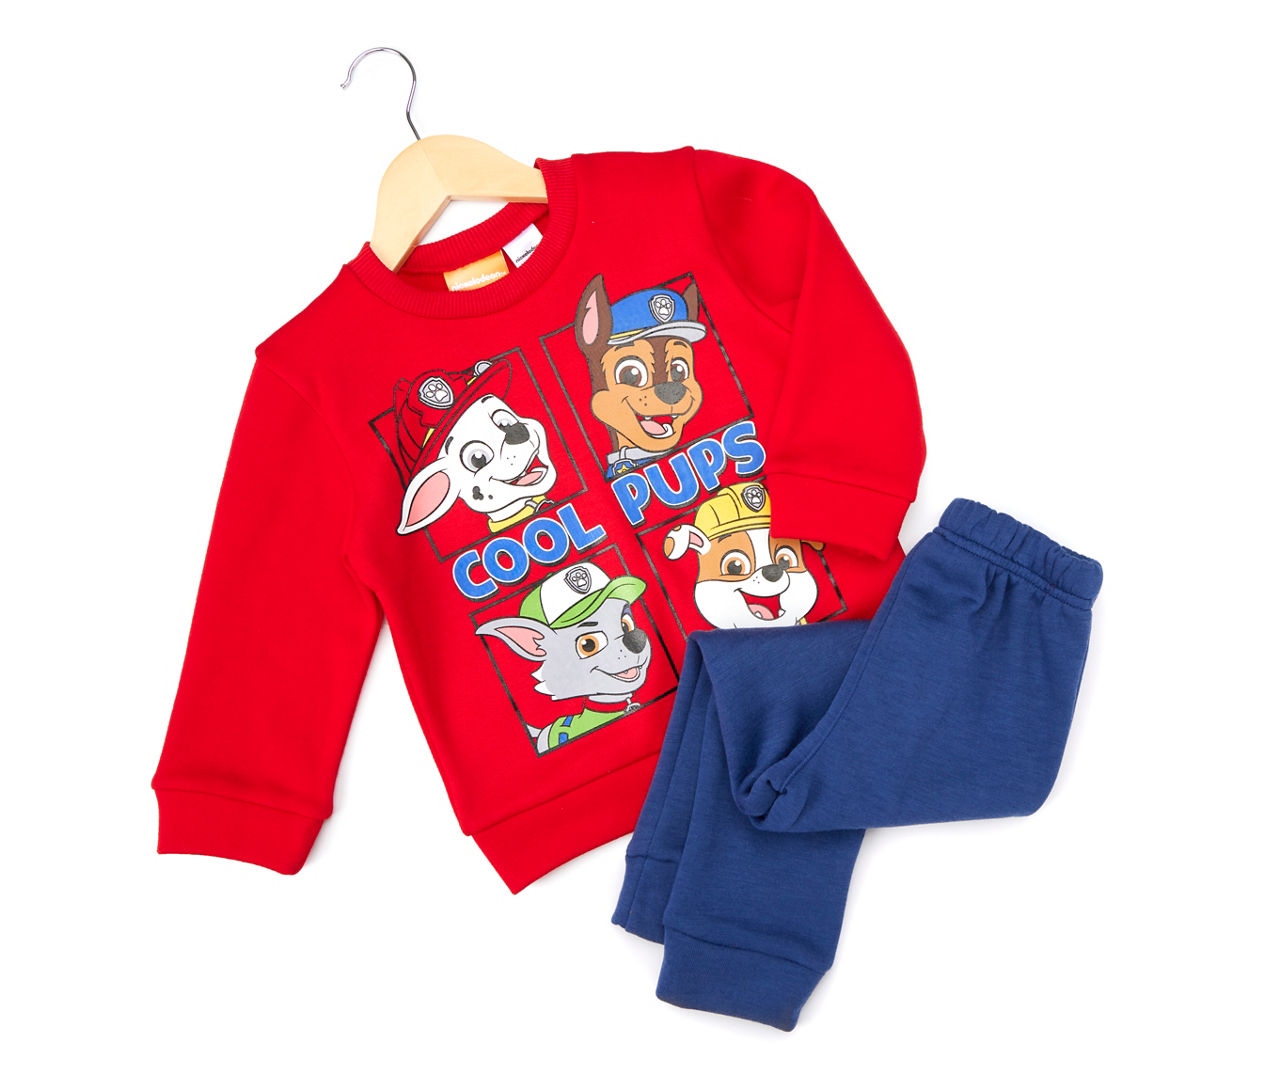 Toddler Size 2T "Cool Pups" PAW Patrol Red & Blue 2-Piece Fleece Outfit